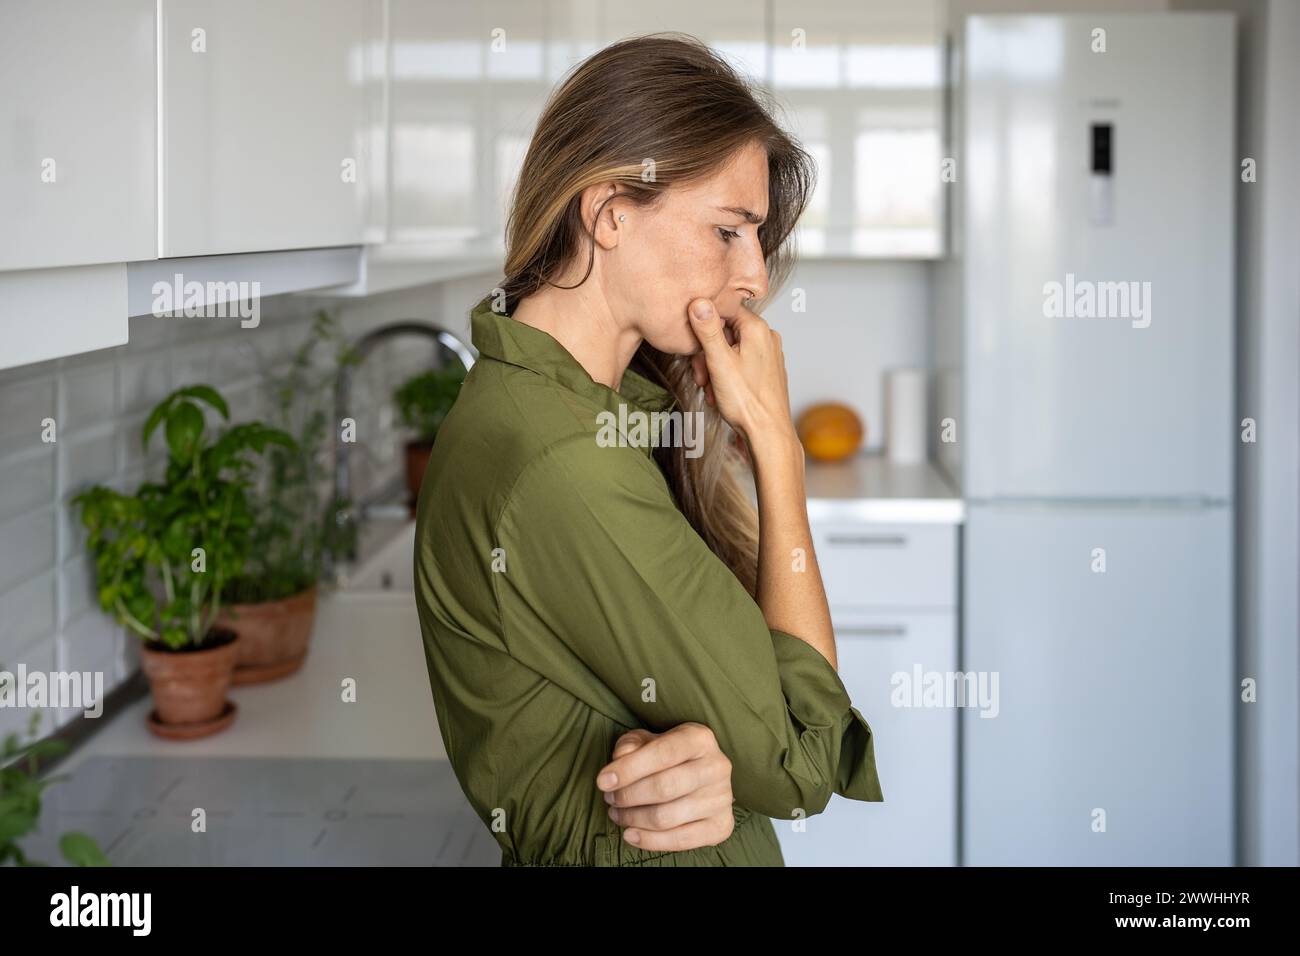 Depressed frustrated middle aged woman thinking about difficult problems standing at home in tension Stock Photo